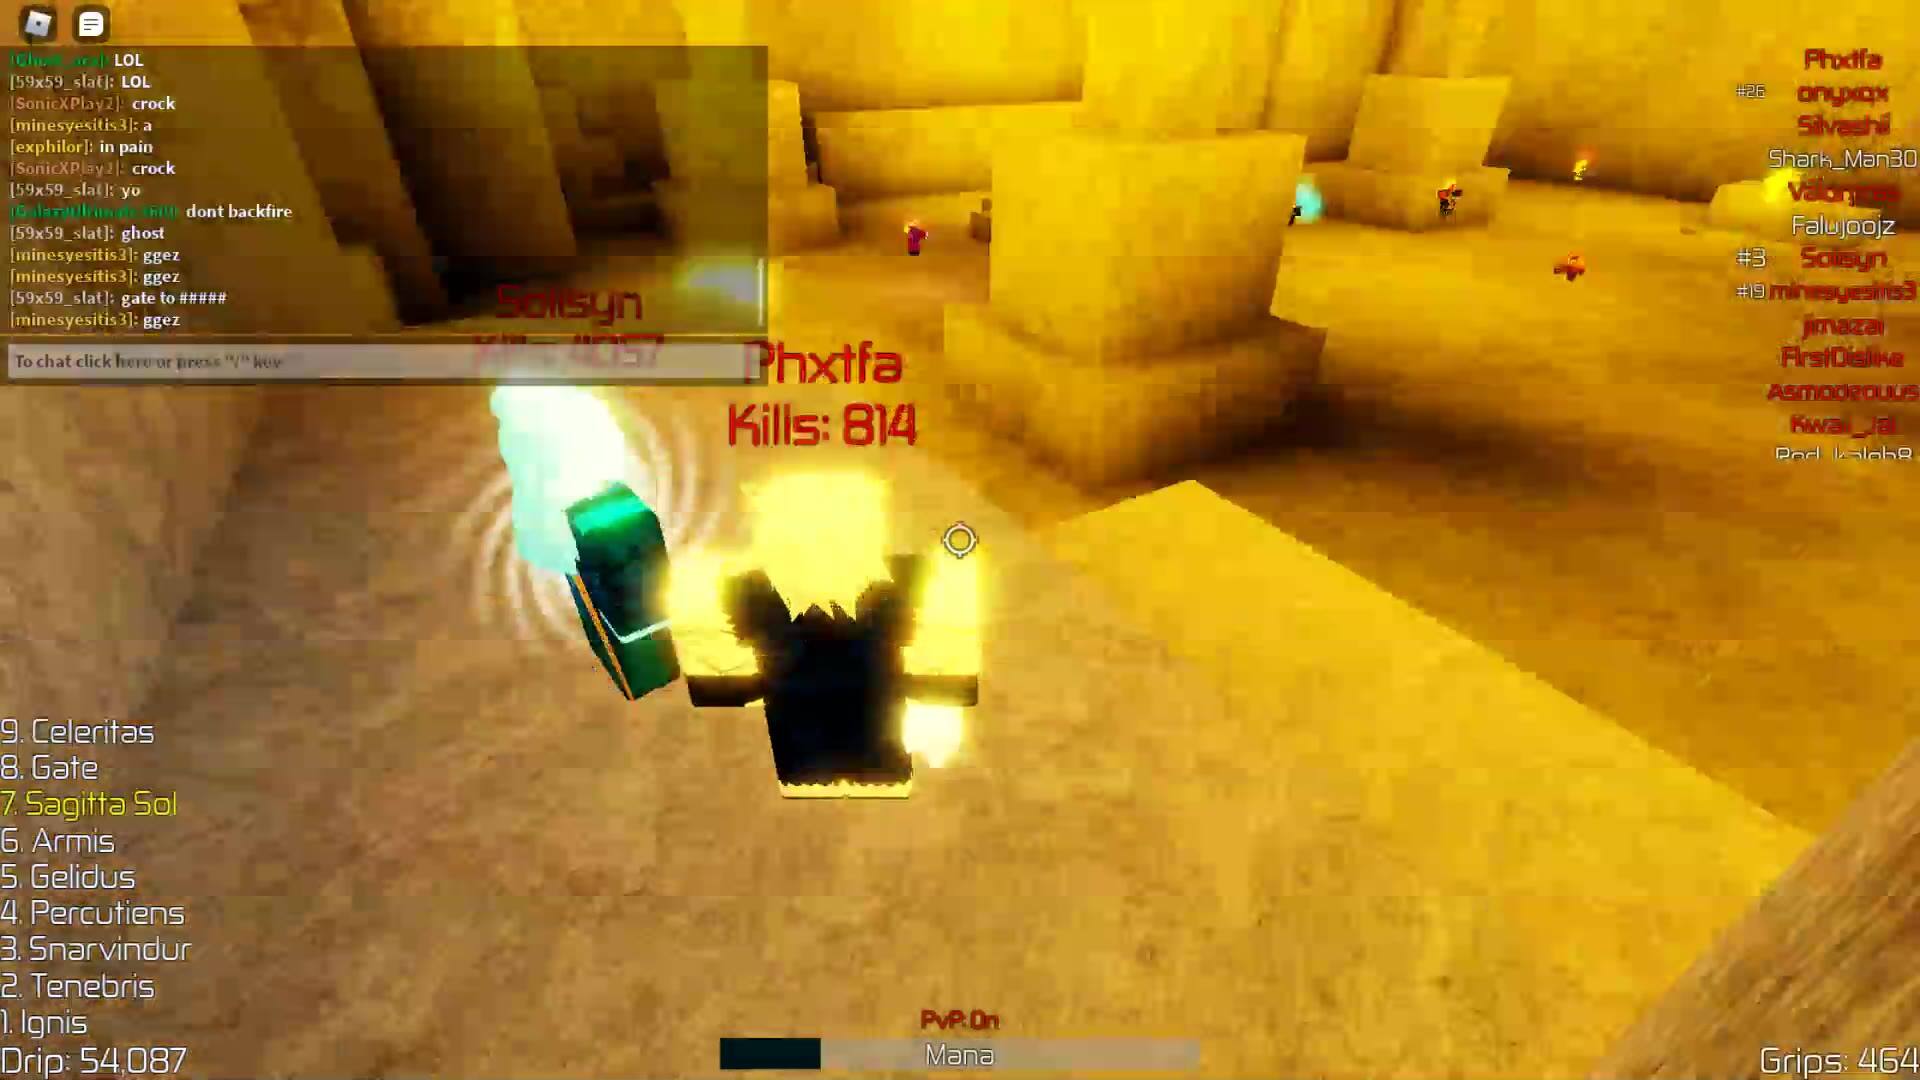 Crrs Hashtag In Roblox Medal Tv - roblox backfire sound